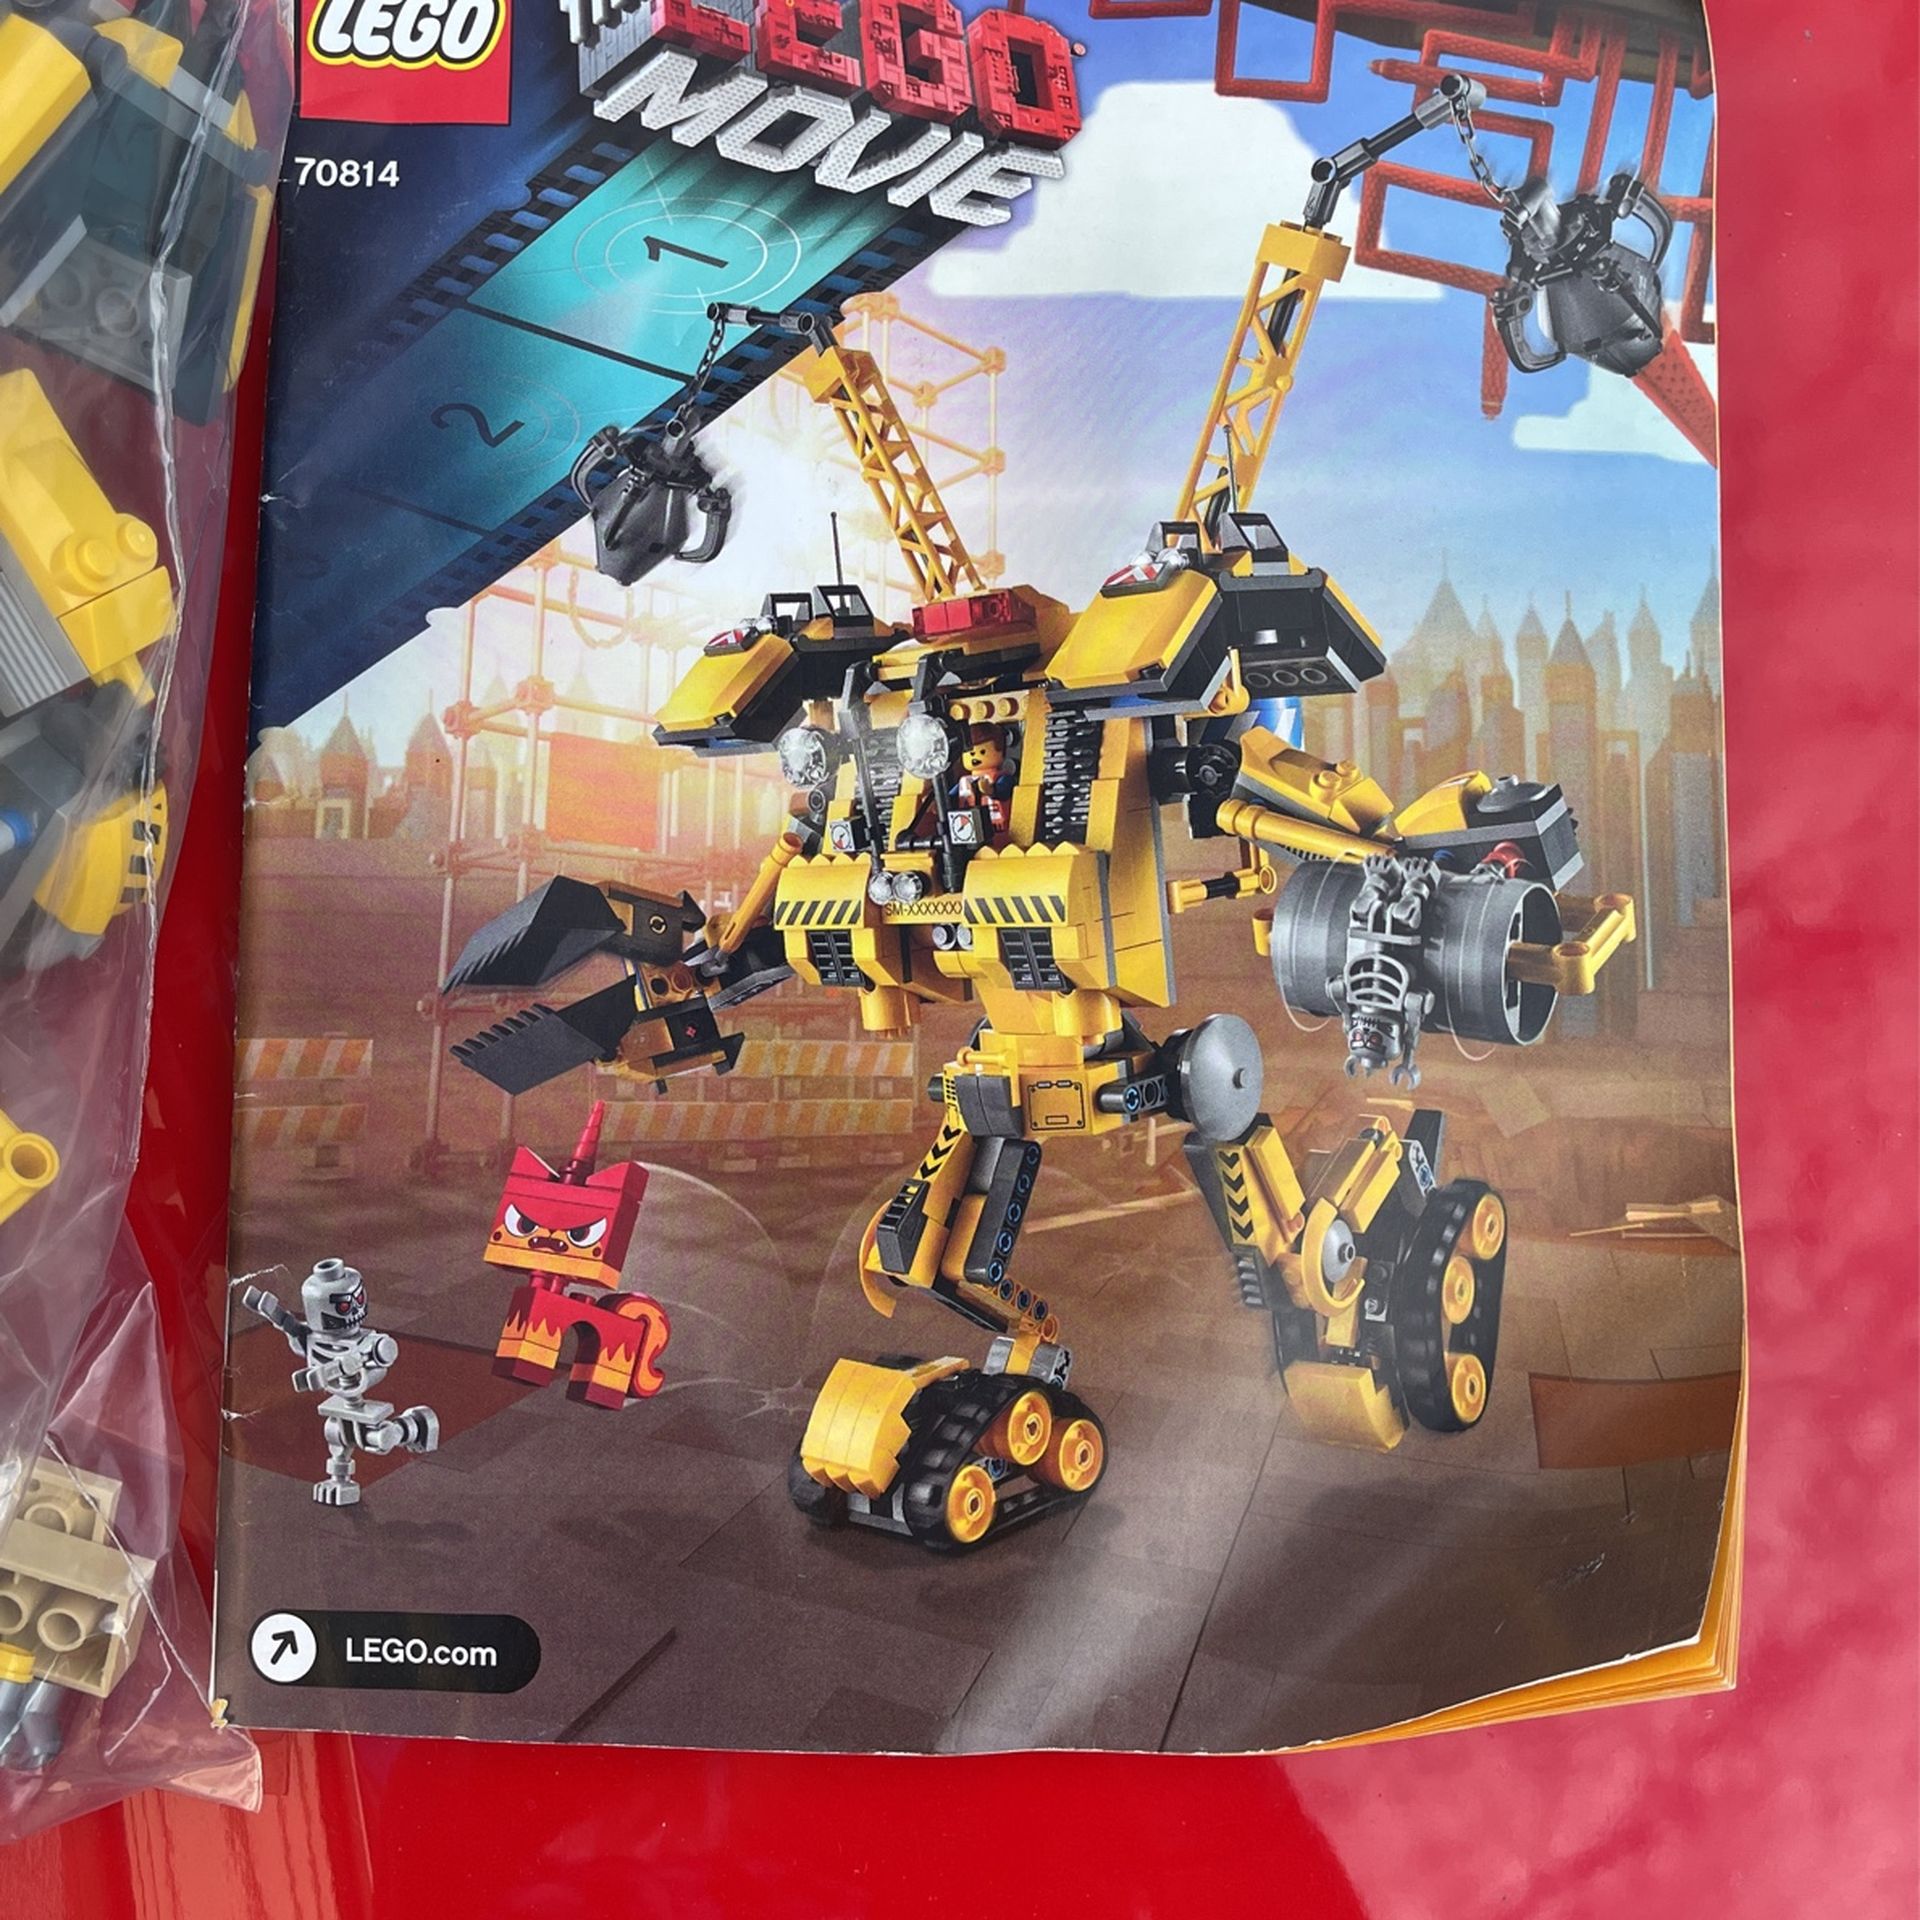 Lego #70814 Gently Used Emmet’s The Lego Movie Construct- O - Mech 